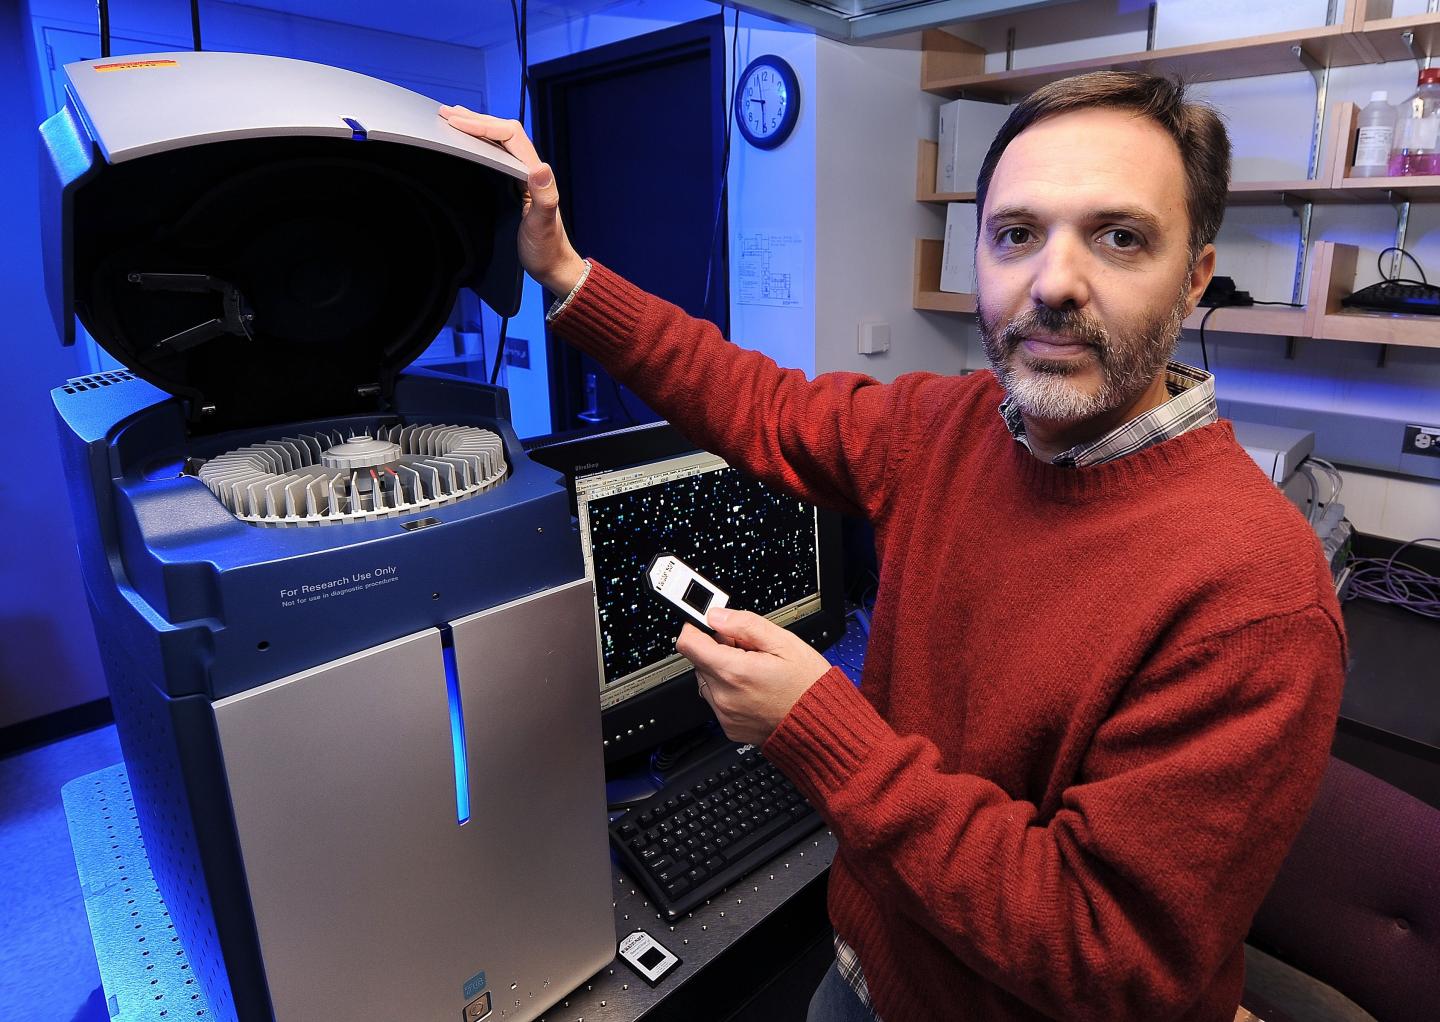 Gustavo MacIntosh works with computer equipment in a lab at Iowa State University